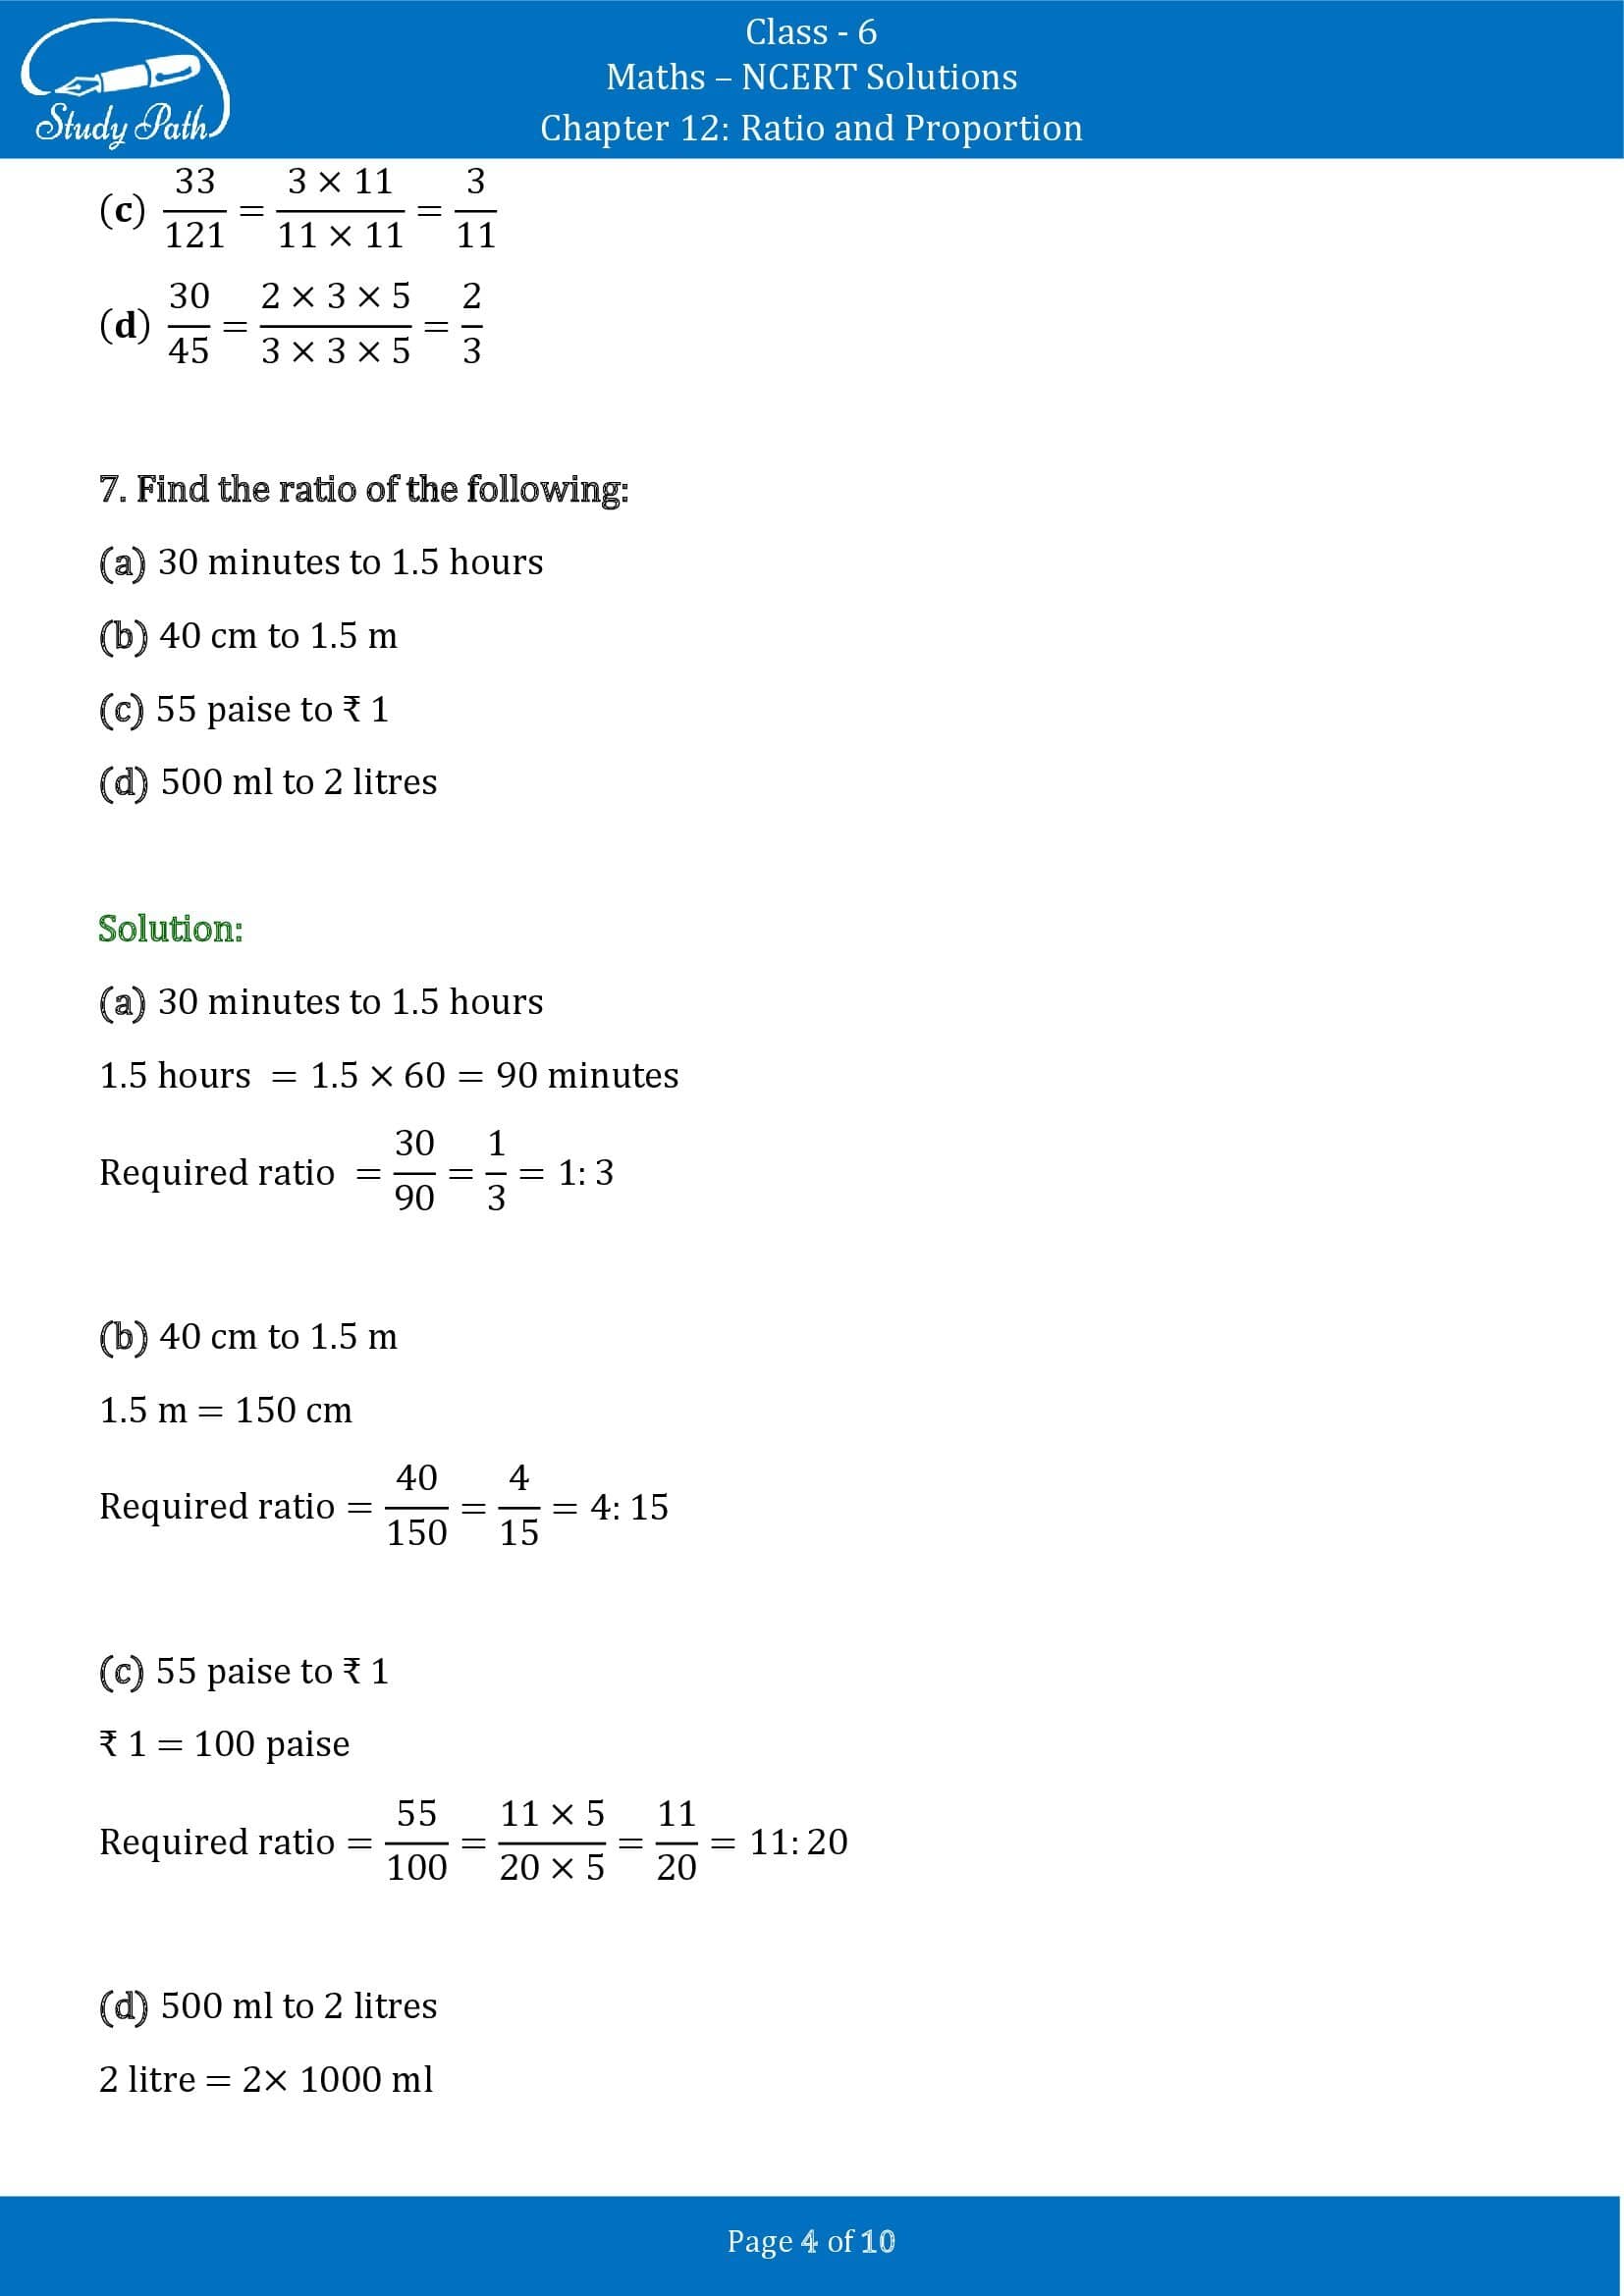 NCERT Solutions for Class 6 Maths Chapter 12 Ratio and Proportion Exercise 12.1 00004